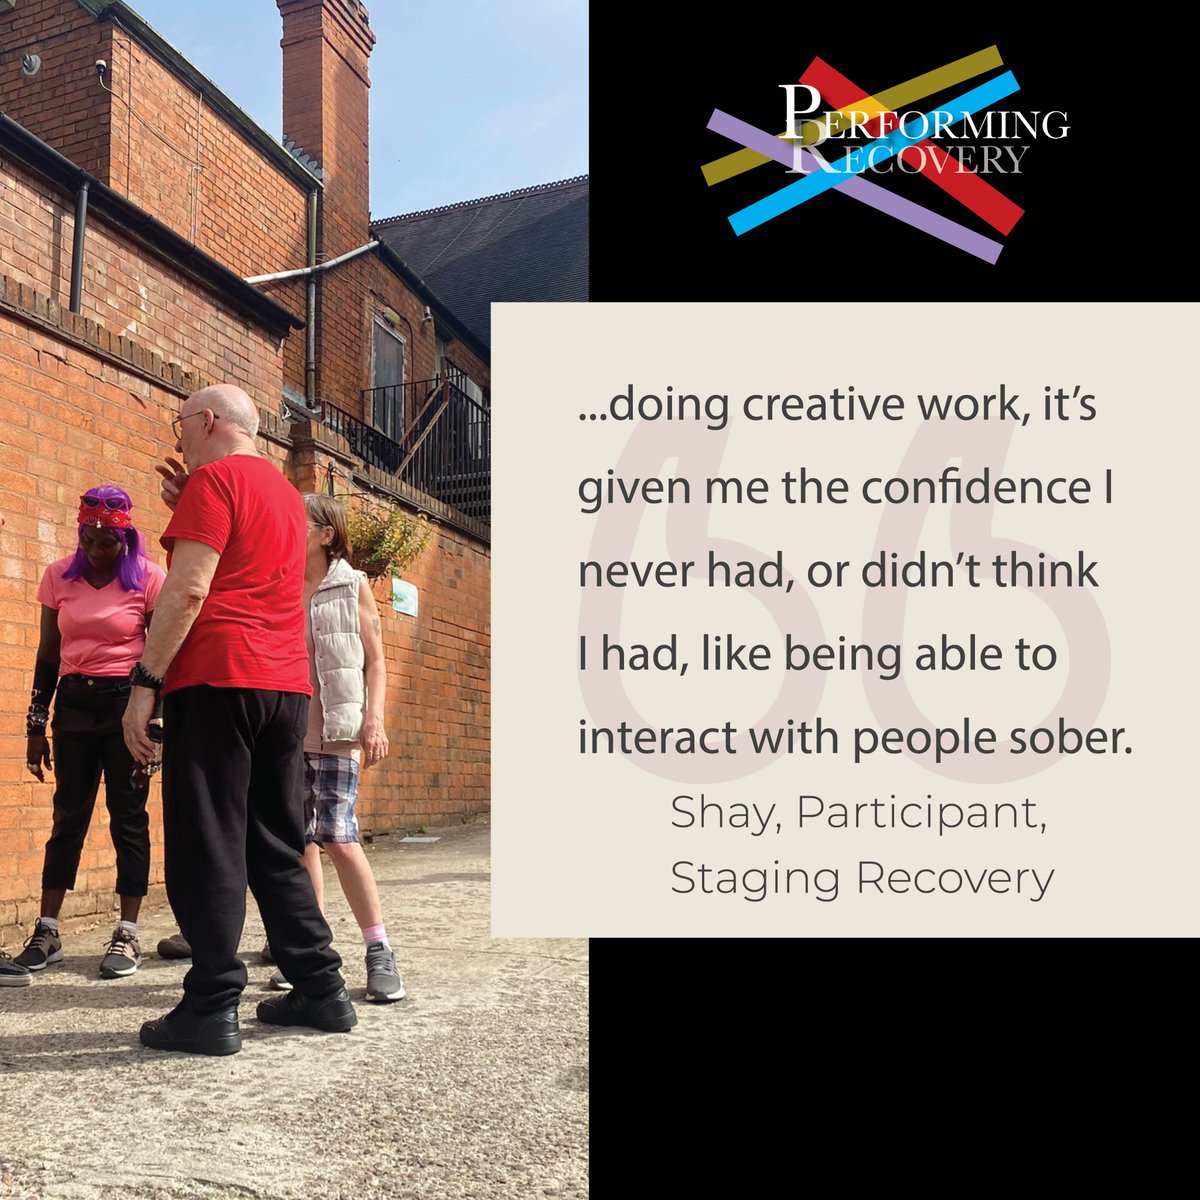 In our latest @PerfRecovery magazine, there is a feature on pages 15 to 21 focussing on the direct feedback, and poetry, of people in @GeeseTheatre's Staging Recovery project.
It's an incredible insight into the power of the company's work. 
Take a look: recovery-arts.org/performing-rec…